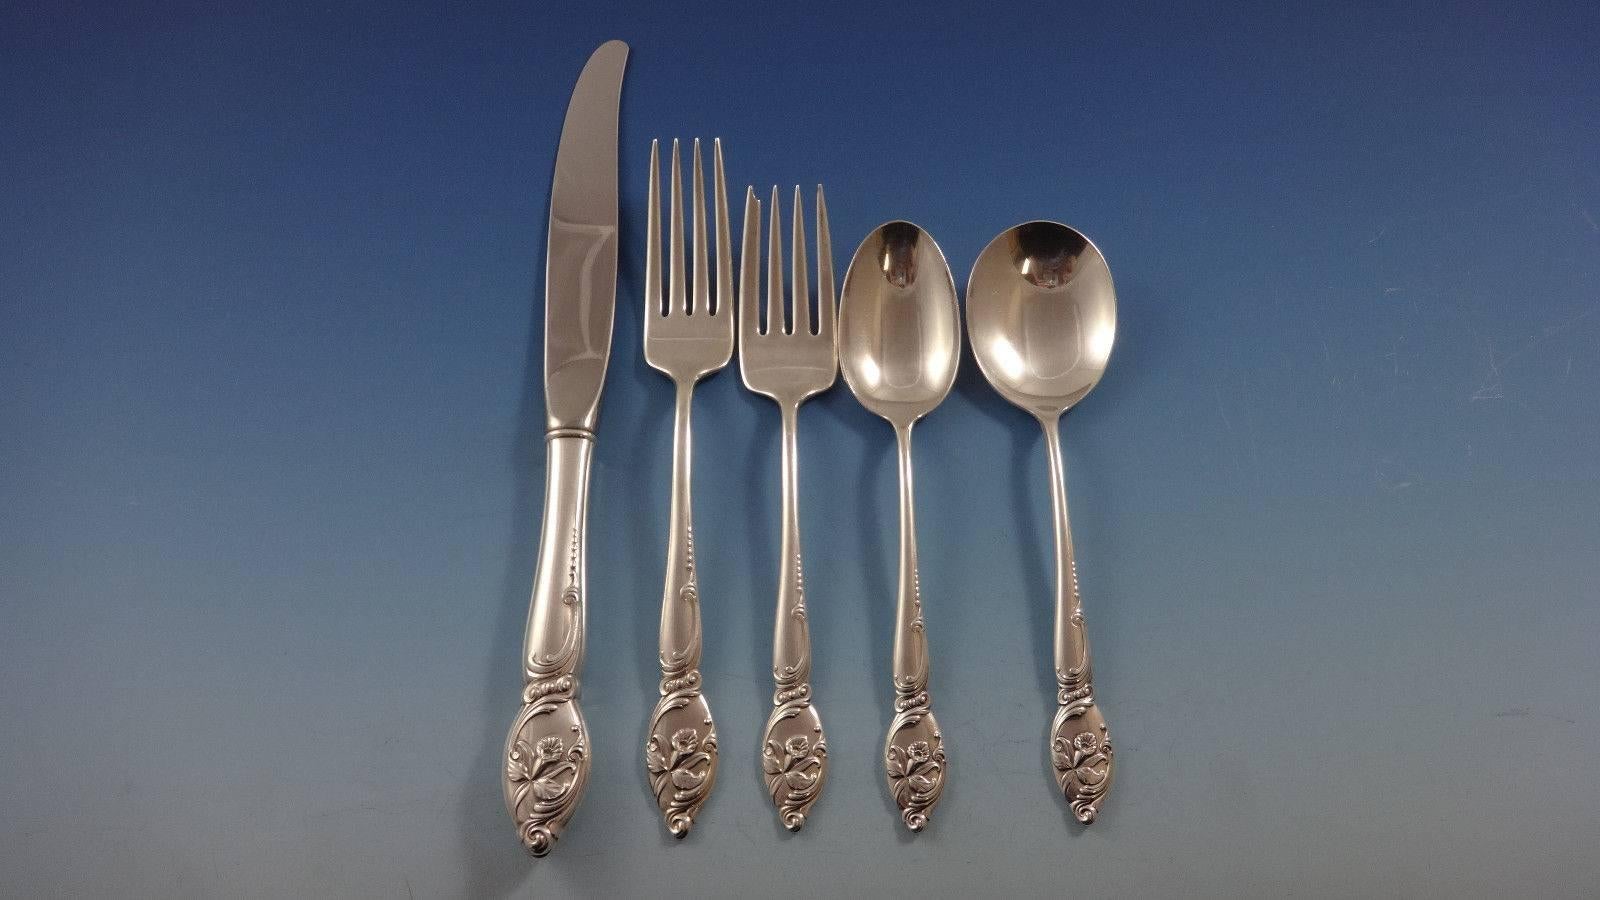 Enchanting Orchid by Westmorland sterling silver flatware set of 46 pieces. This set includes:

Eight knives, 9 1/8